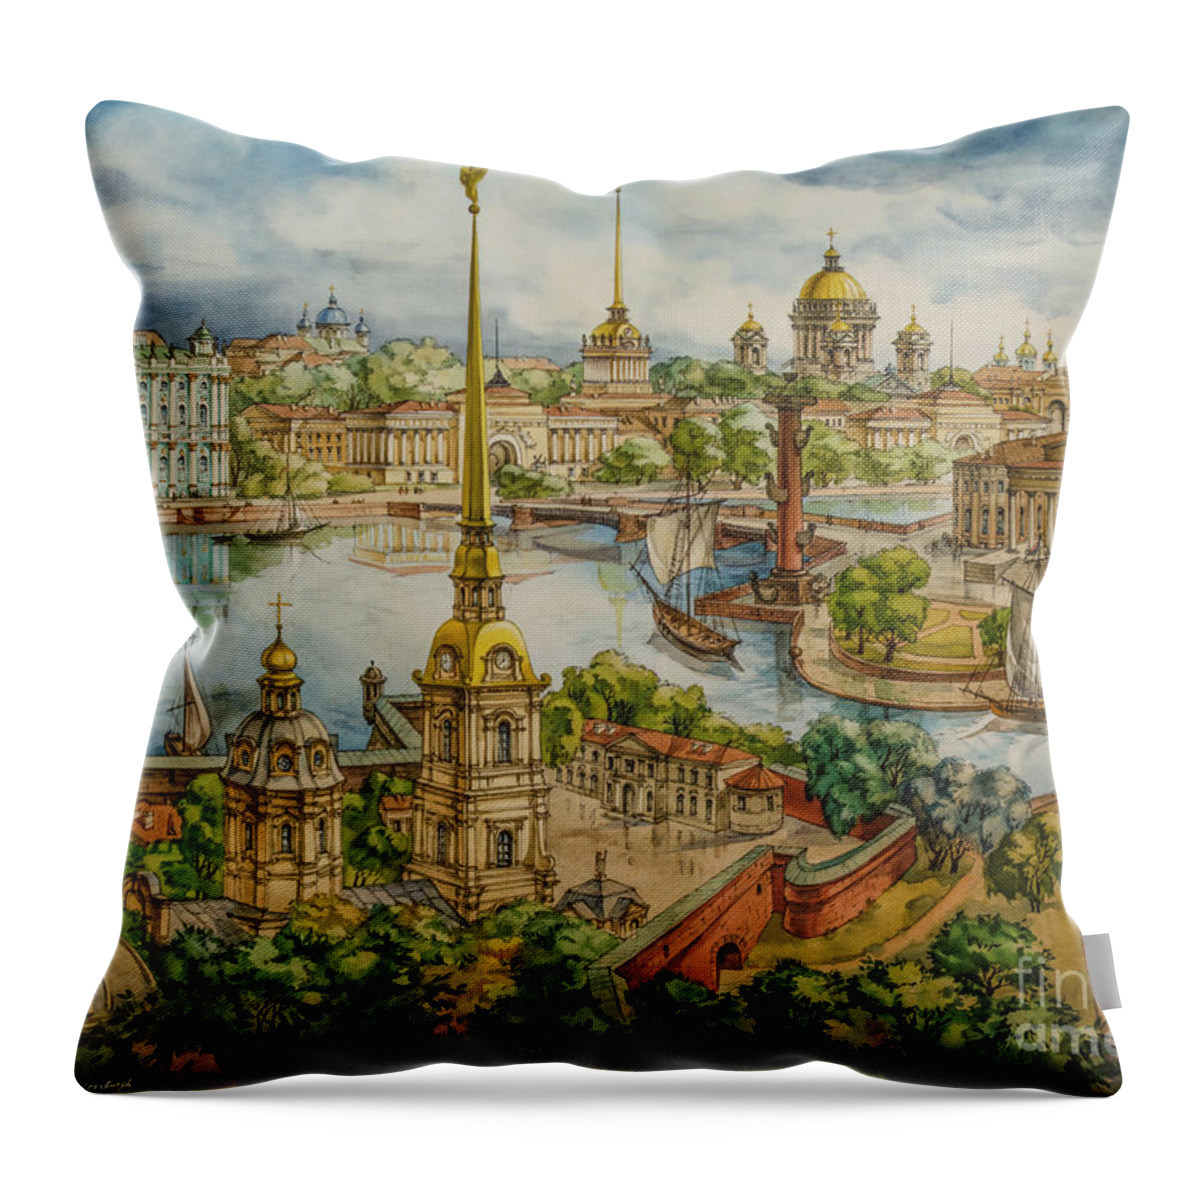 Peter And Paul's Fortress Throw Pillow featuring the photograph Peter and Paul's Fortress by Maria Rabinky